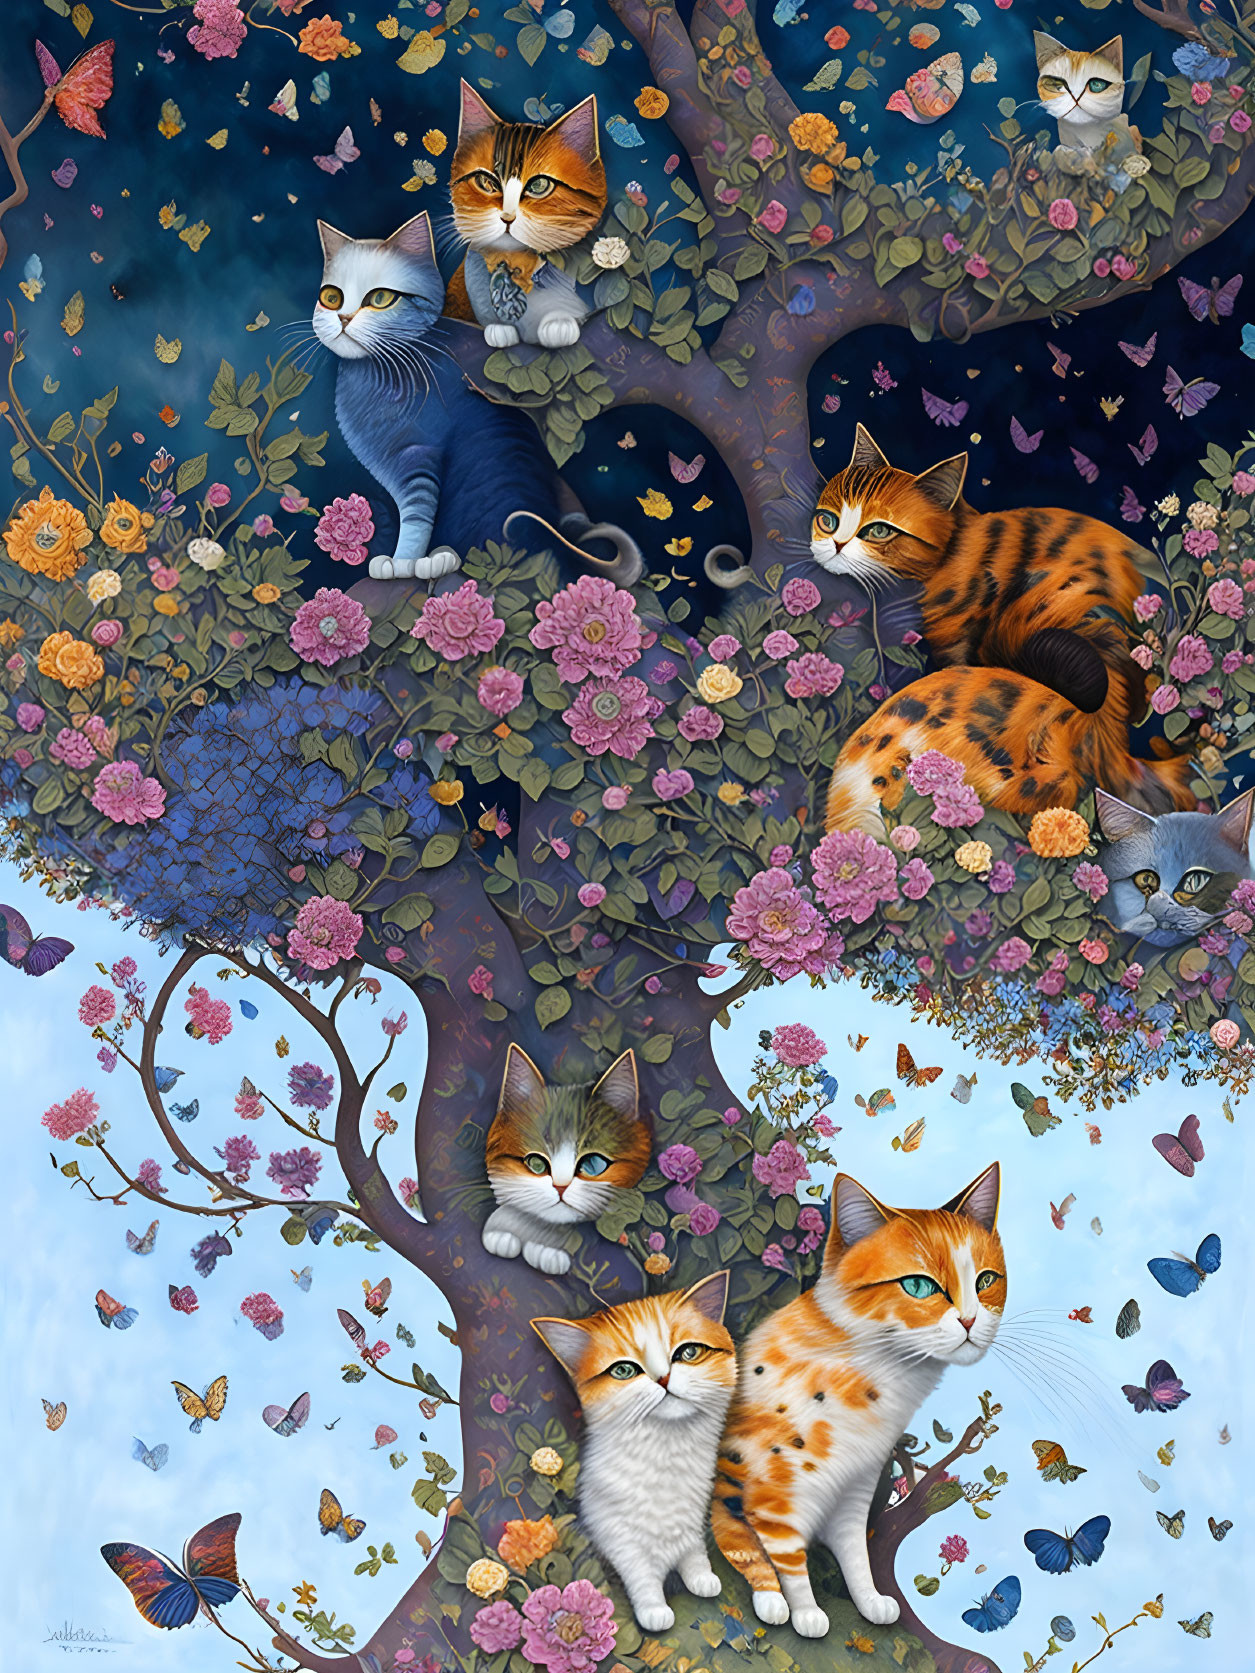 CATS FOR A TREE